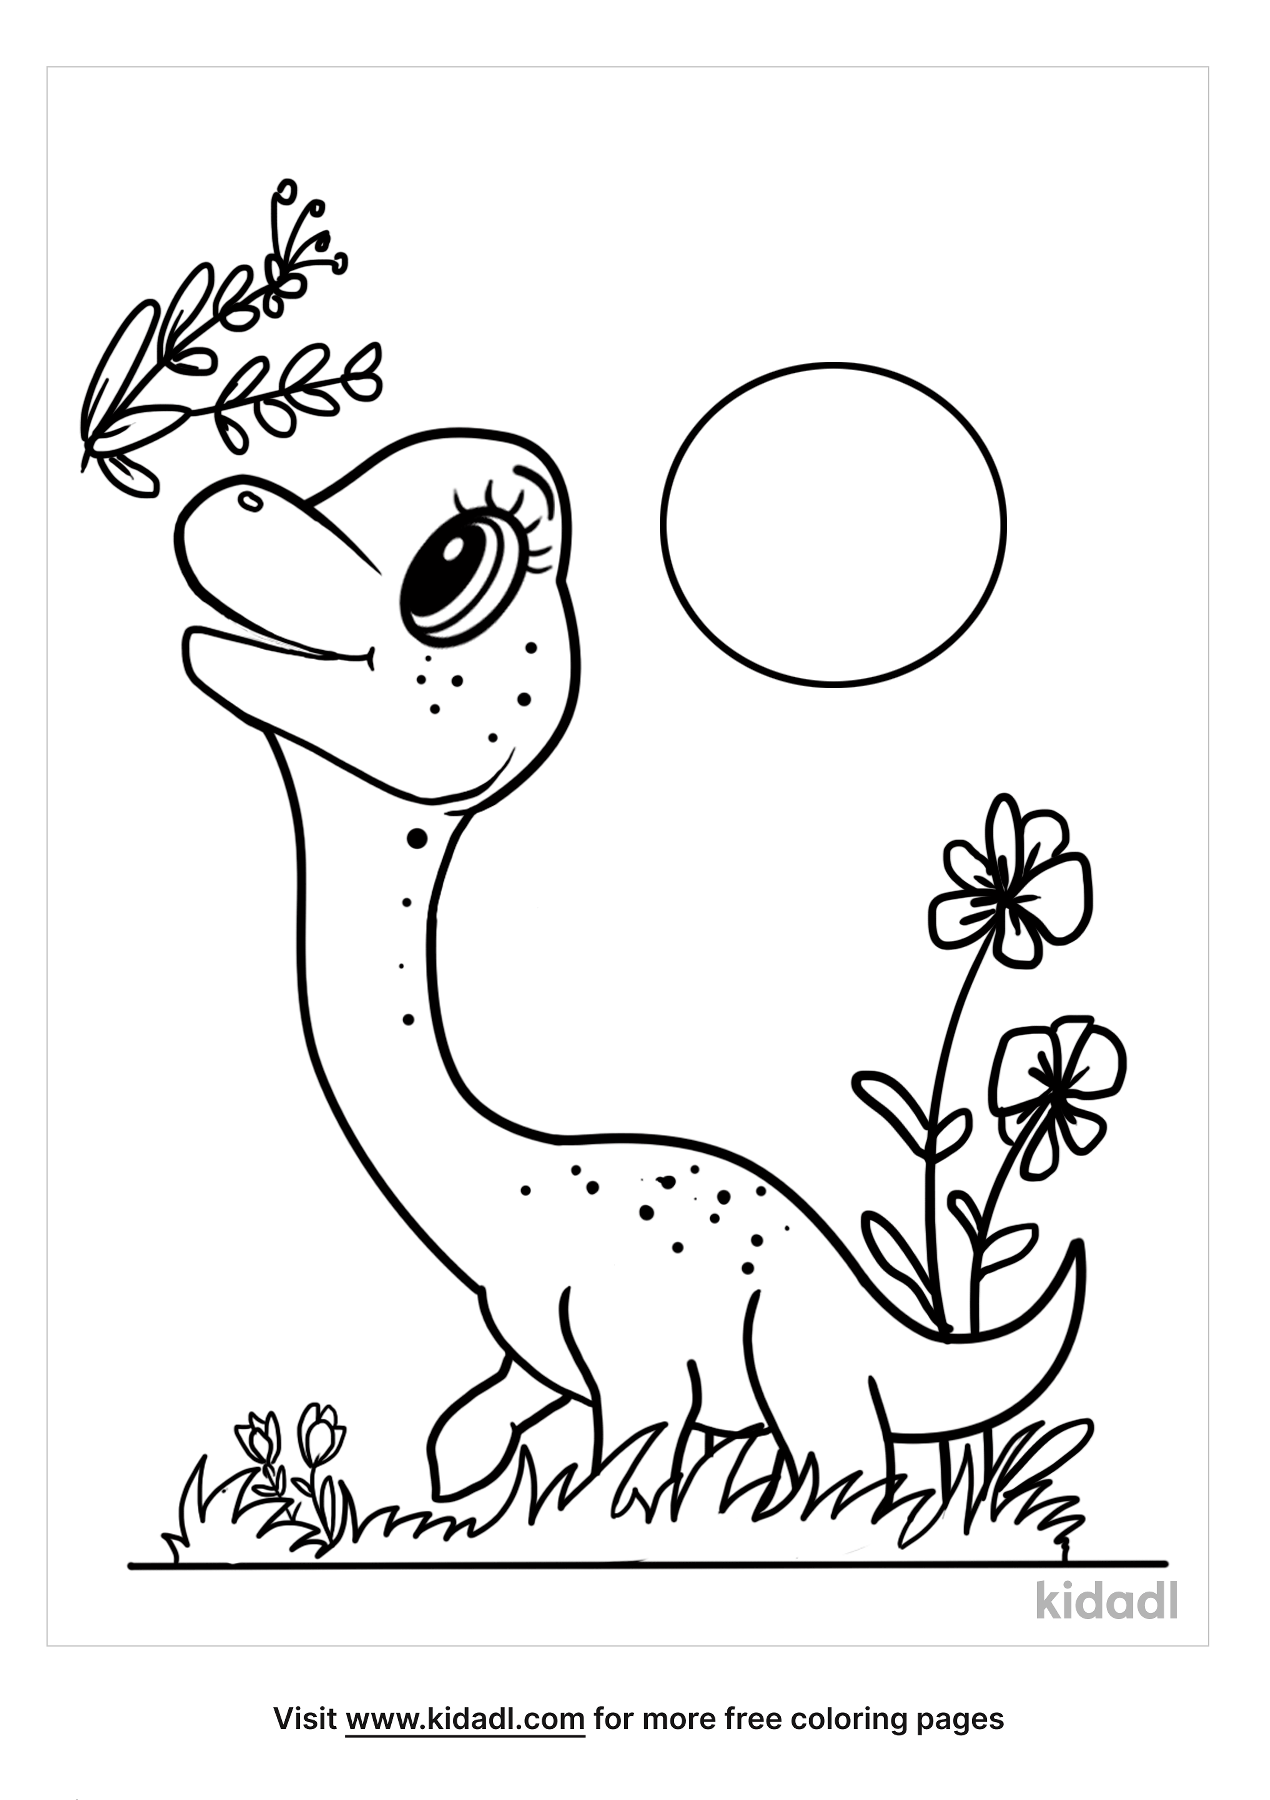 Giganotosaurus Coloring Pages | Free Dinosaurs Coloring Pages | Kidadl